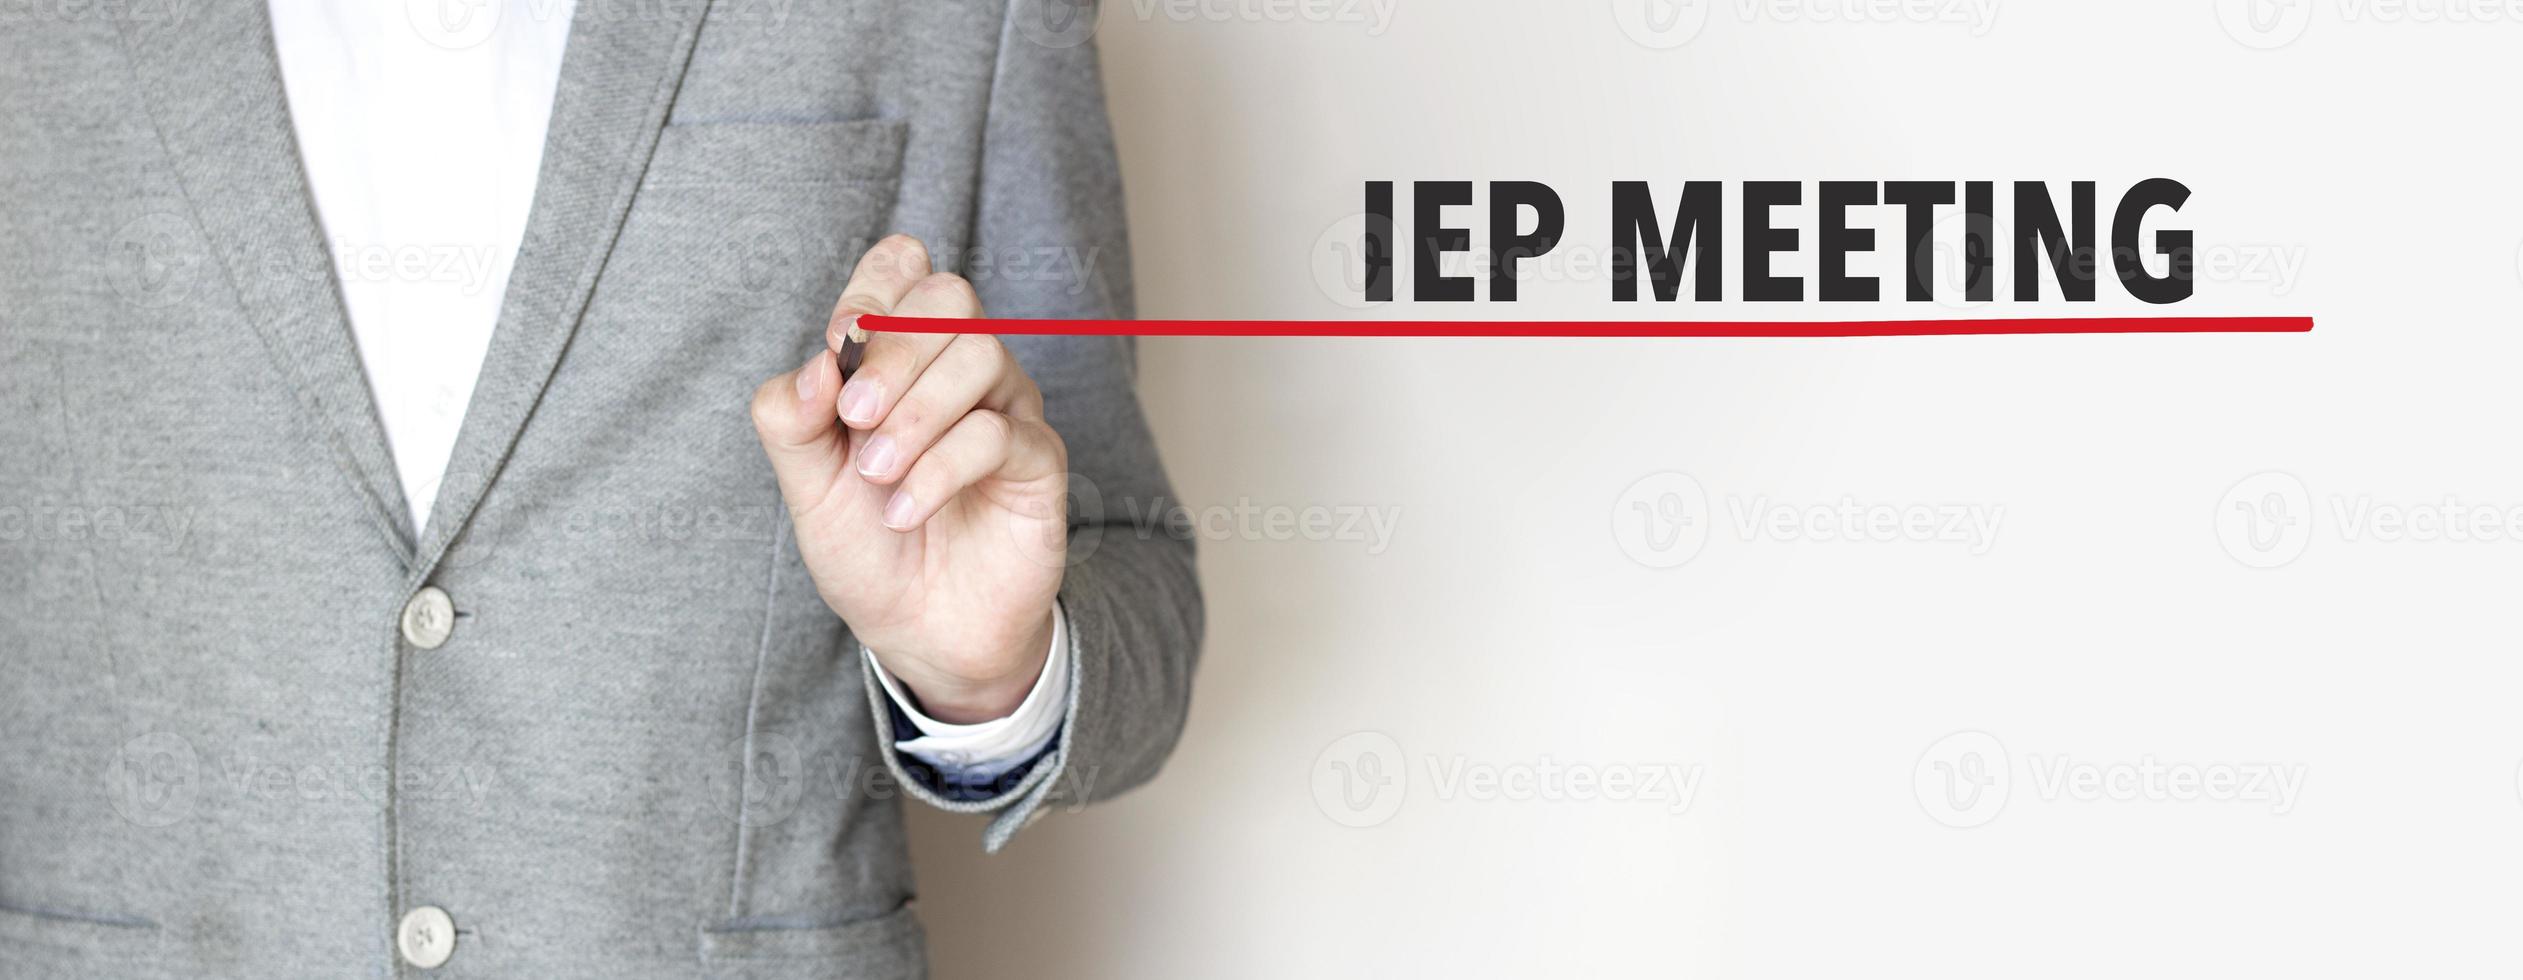 iep meeting words made with marker and businessman photo